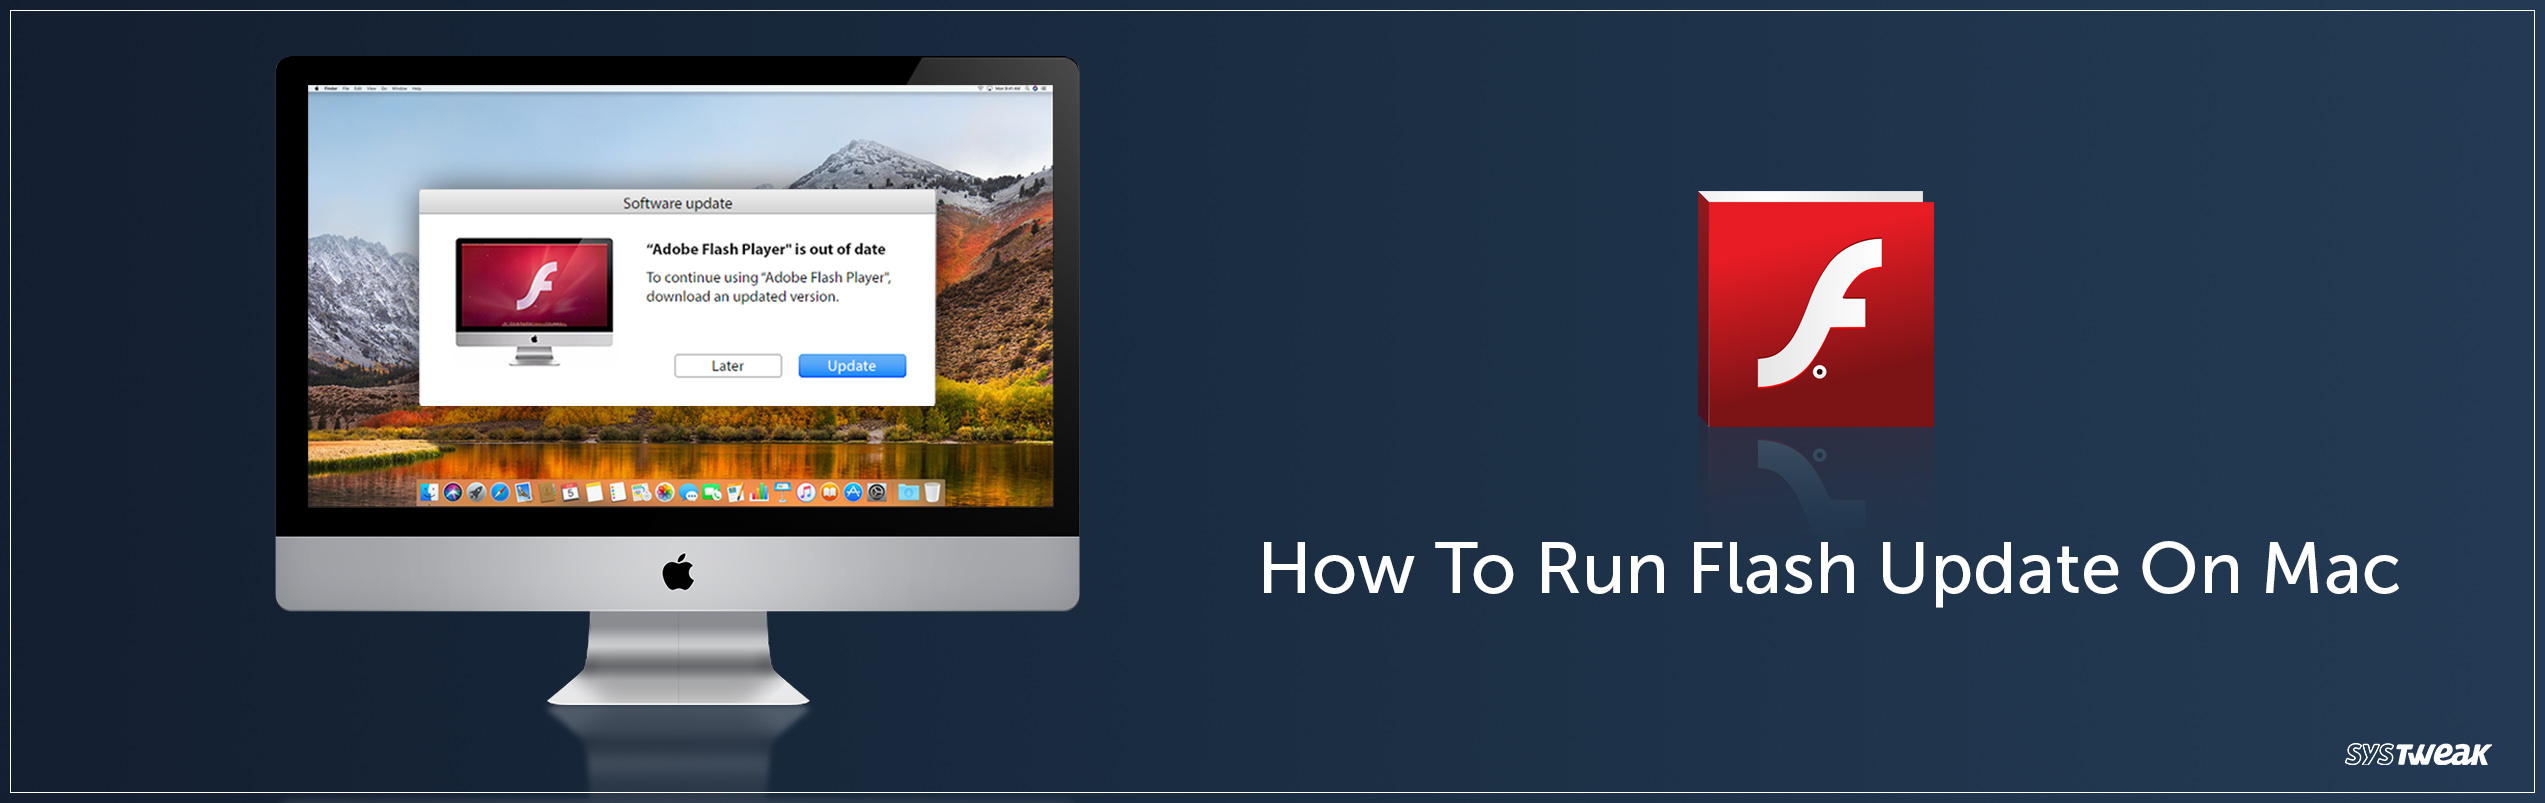 How To Run Adobe Flash Player For Mac